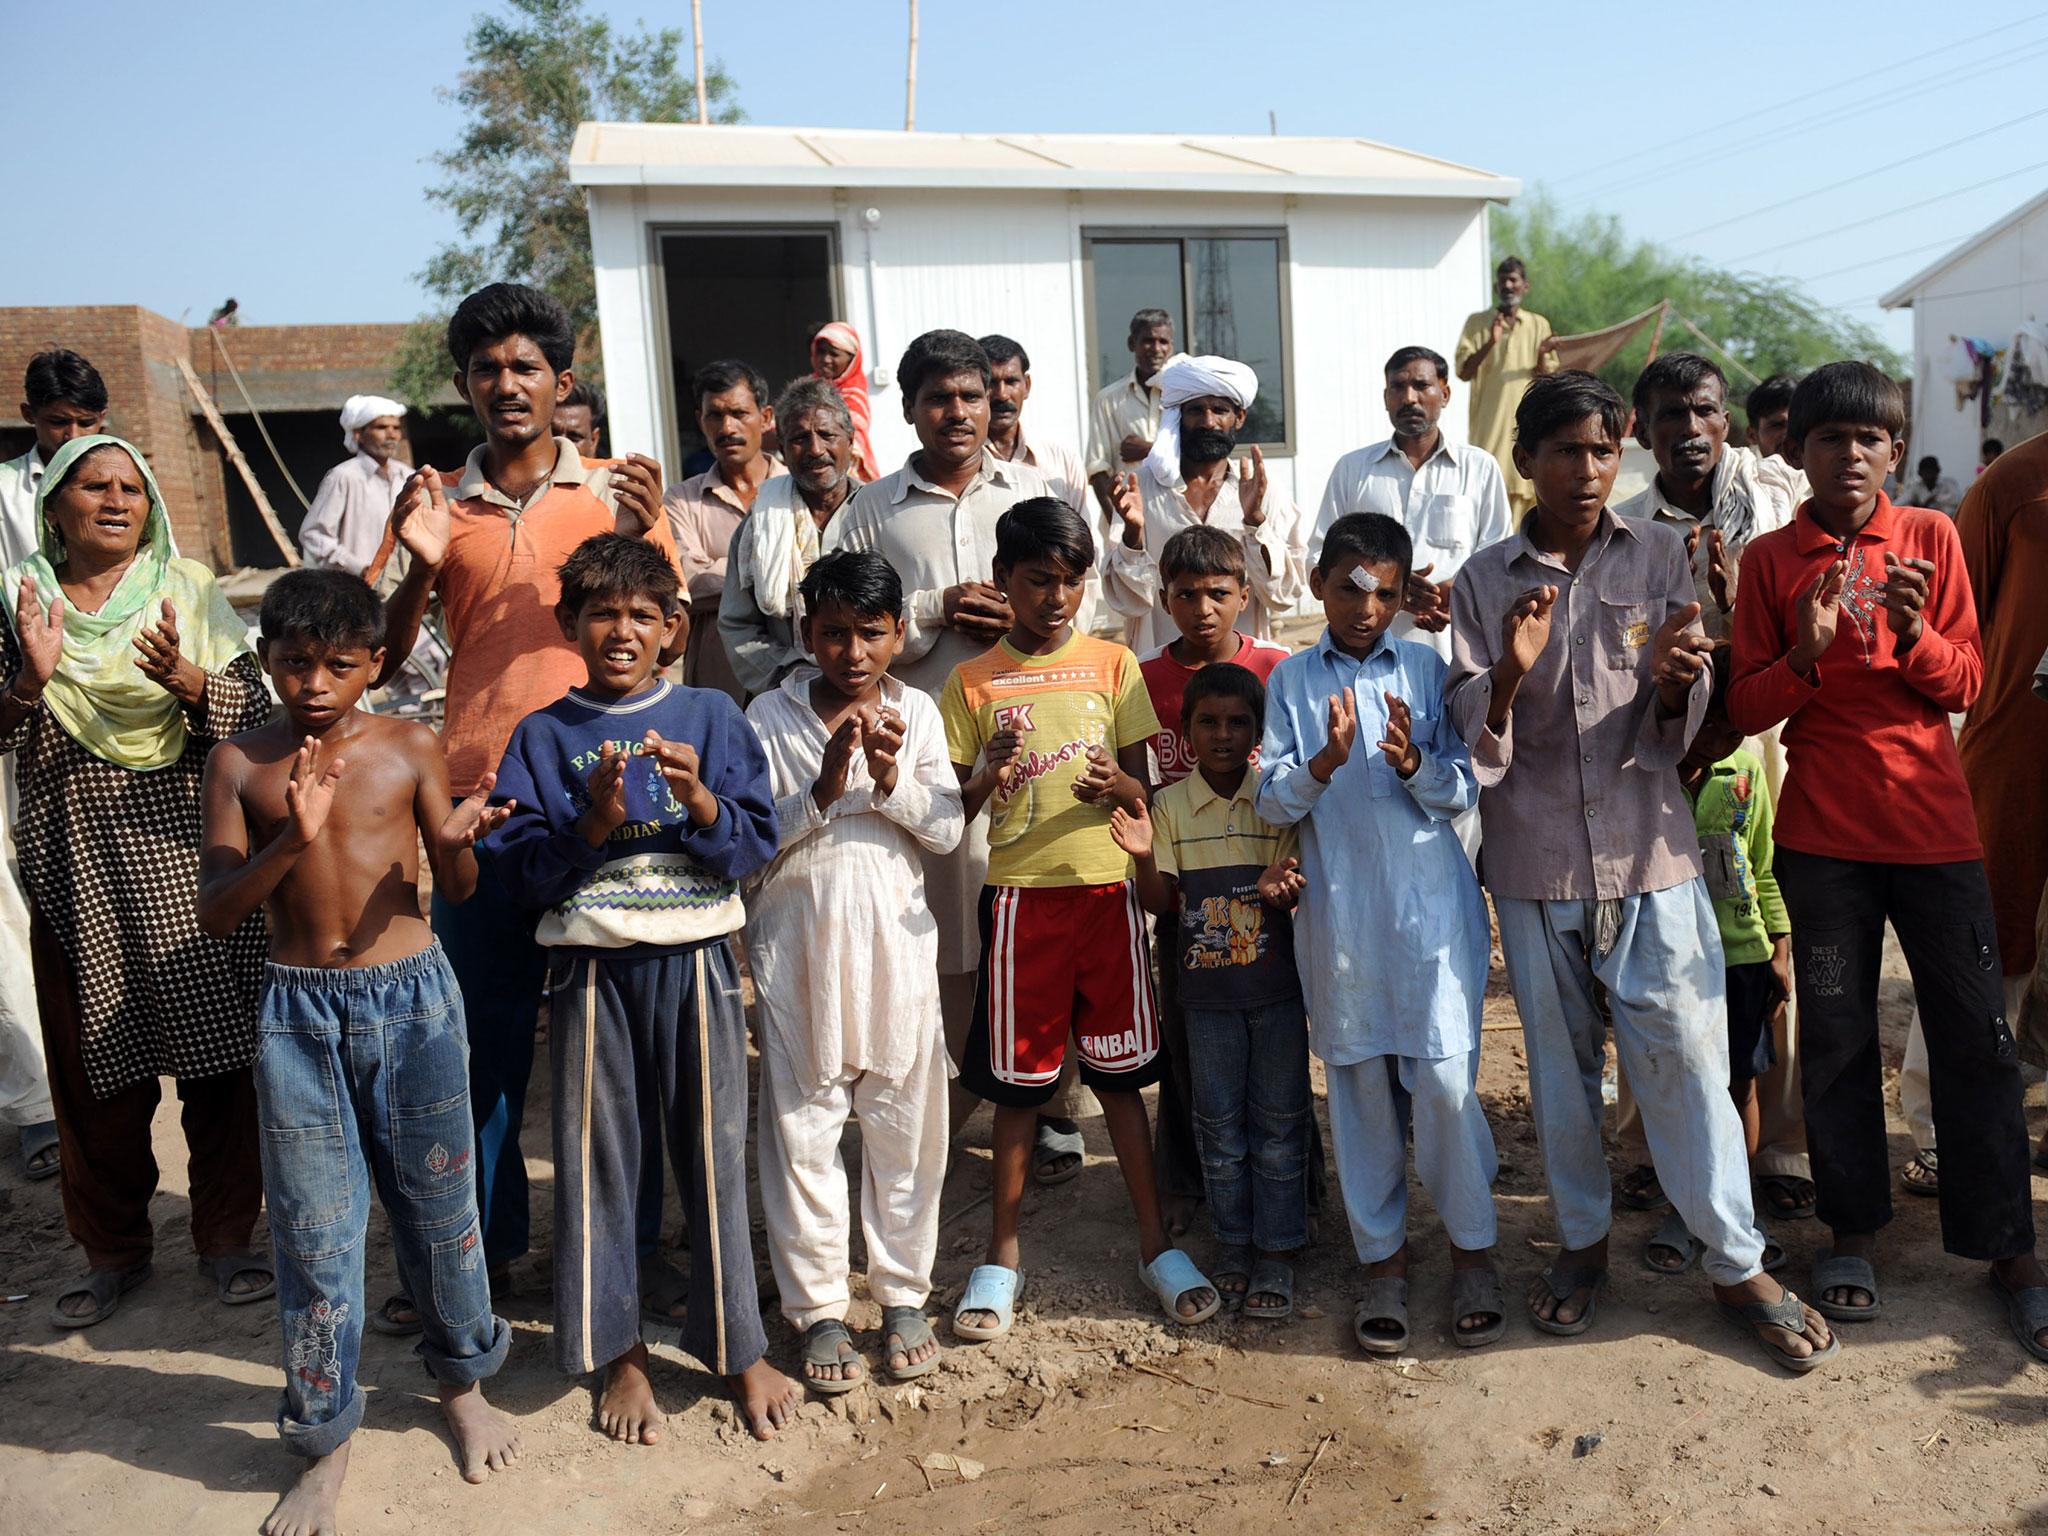 Pakistani Christians pictured praying outside homes under construction in Gojra